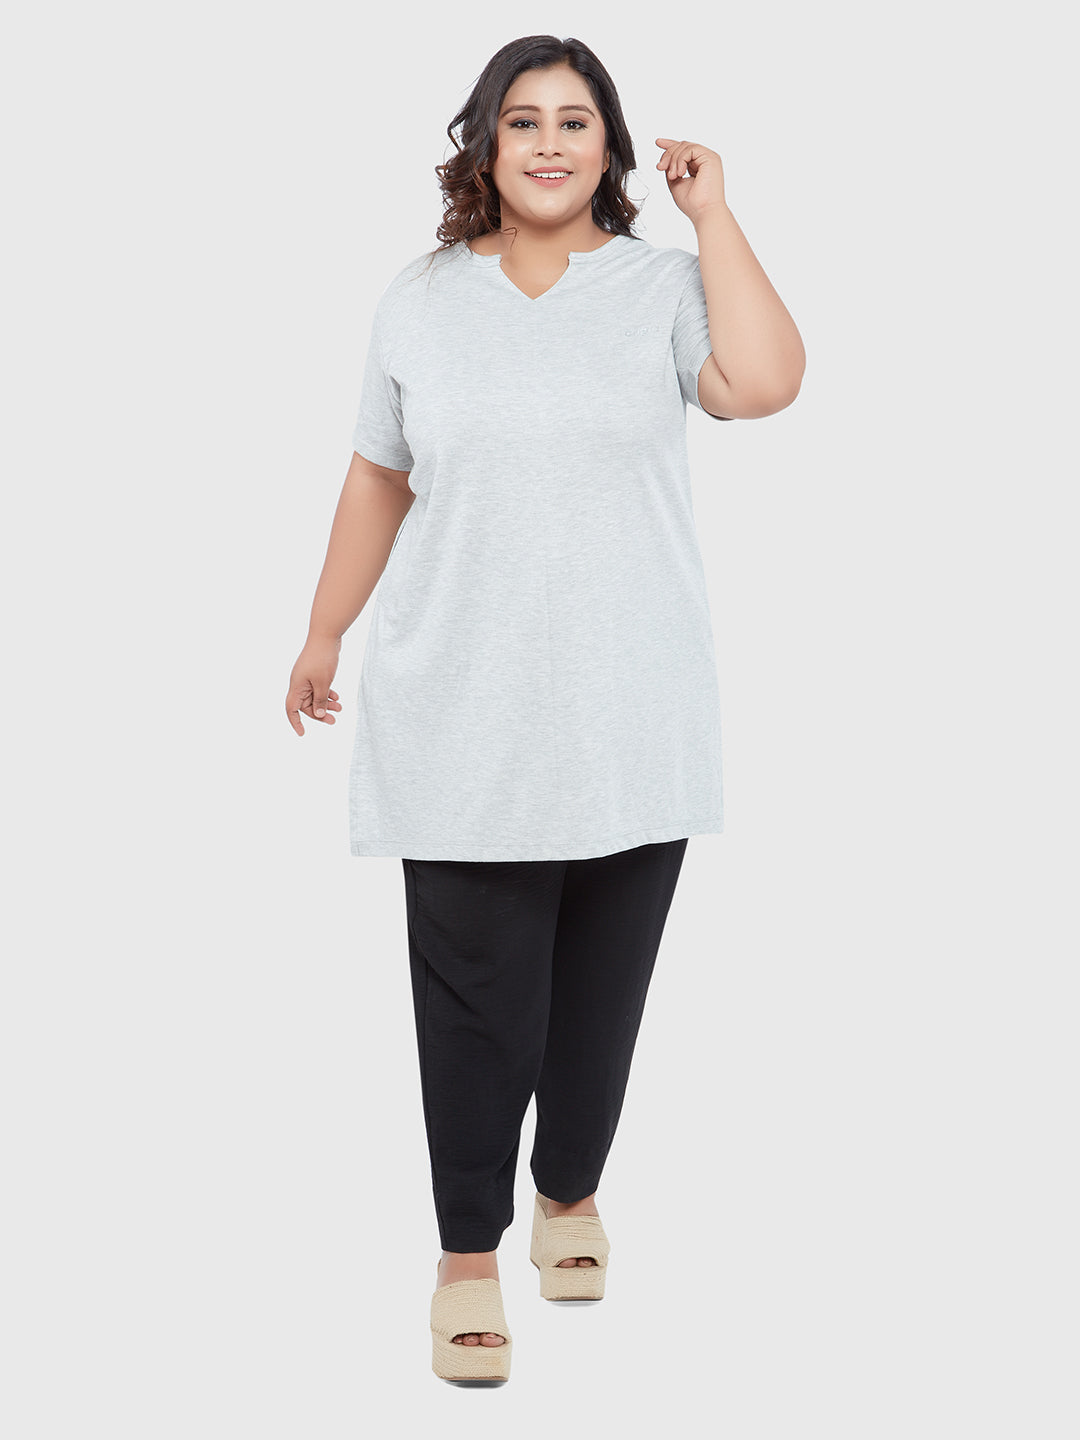 Stylish Grey Cotton Plus Size Half Sleeves Long Top For Women Online In India